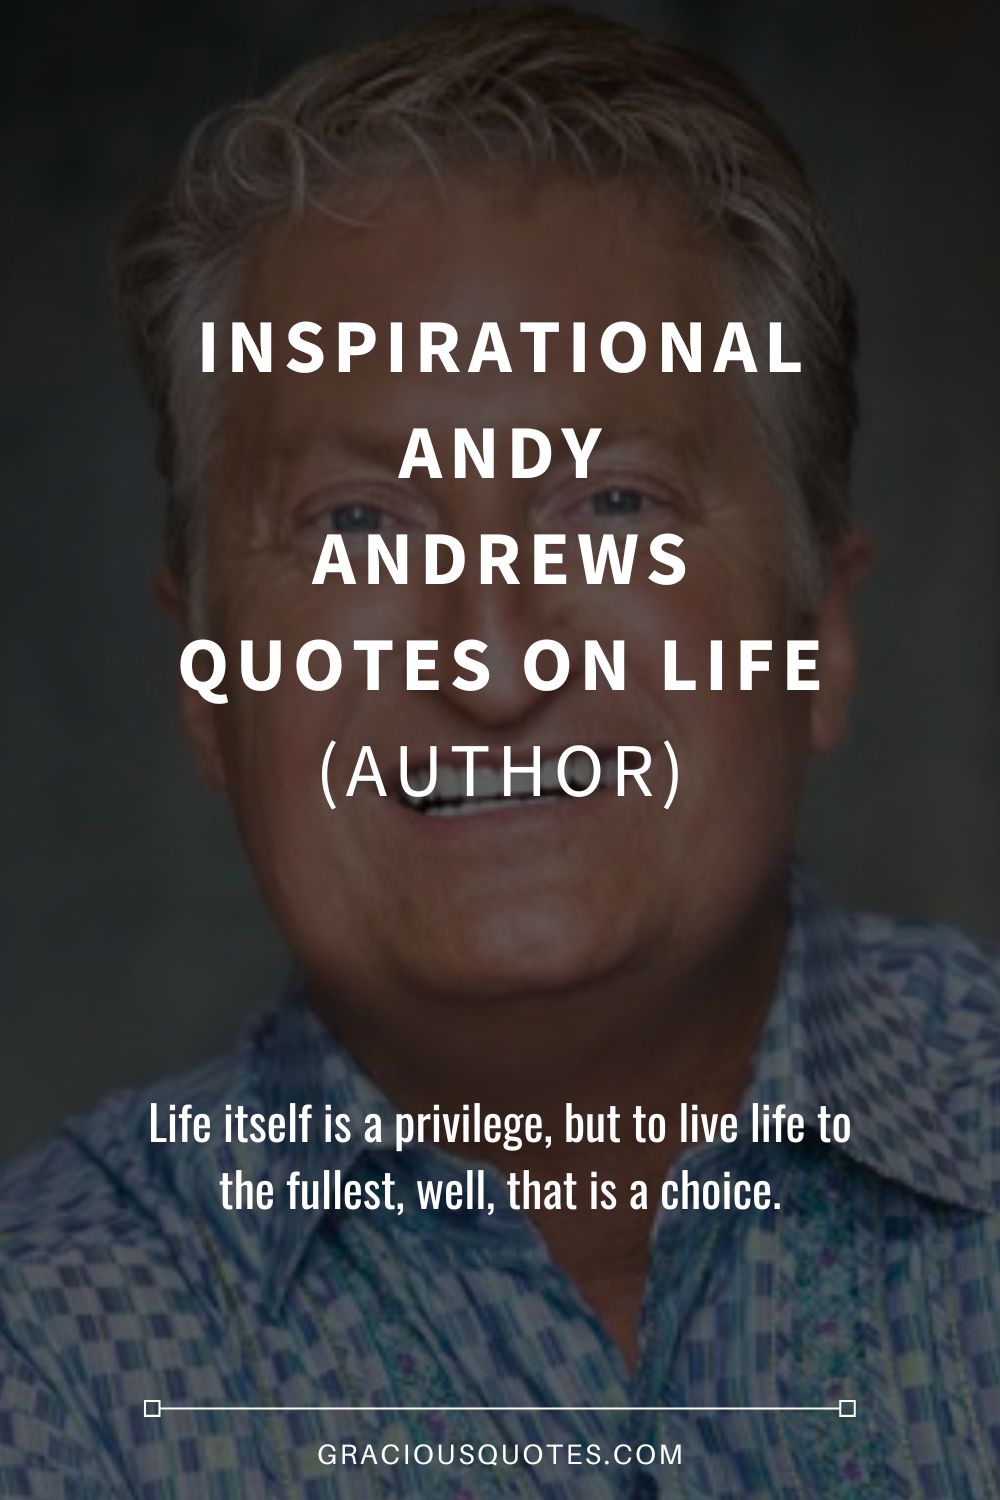 Inspirational Andy Andrews Quotes on Life (AUTHOR) - Gracious Quotes